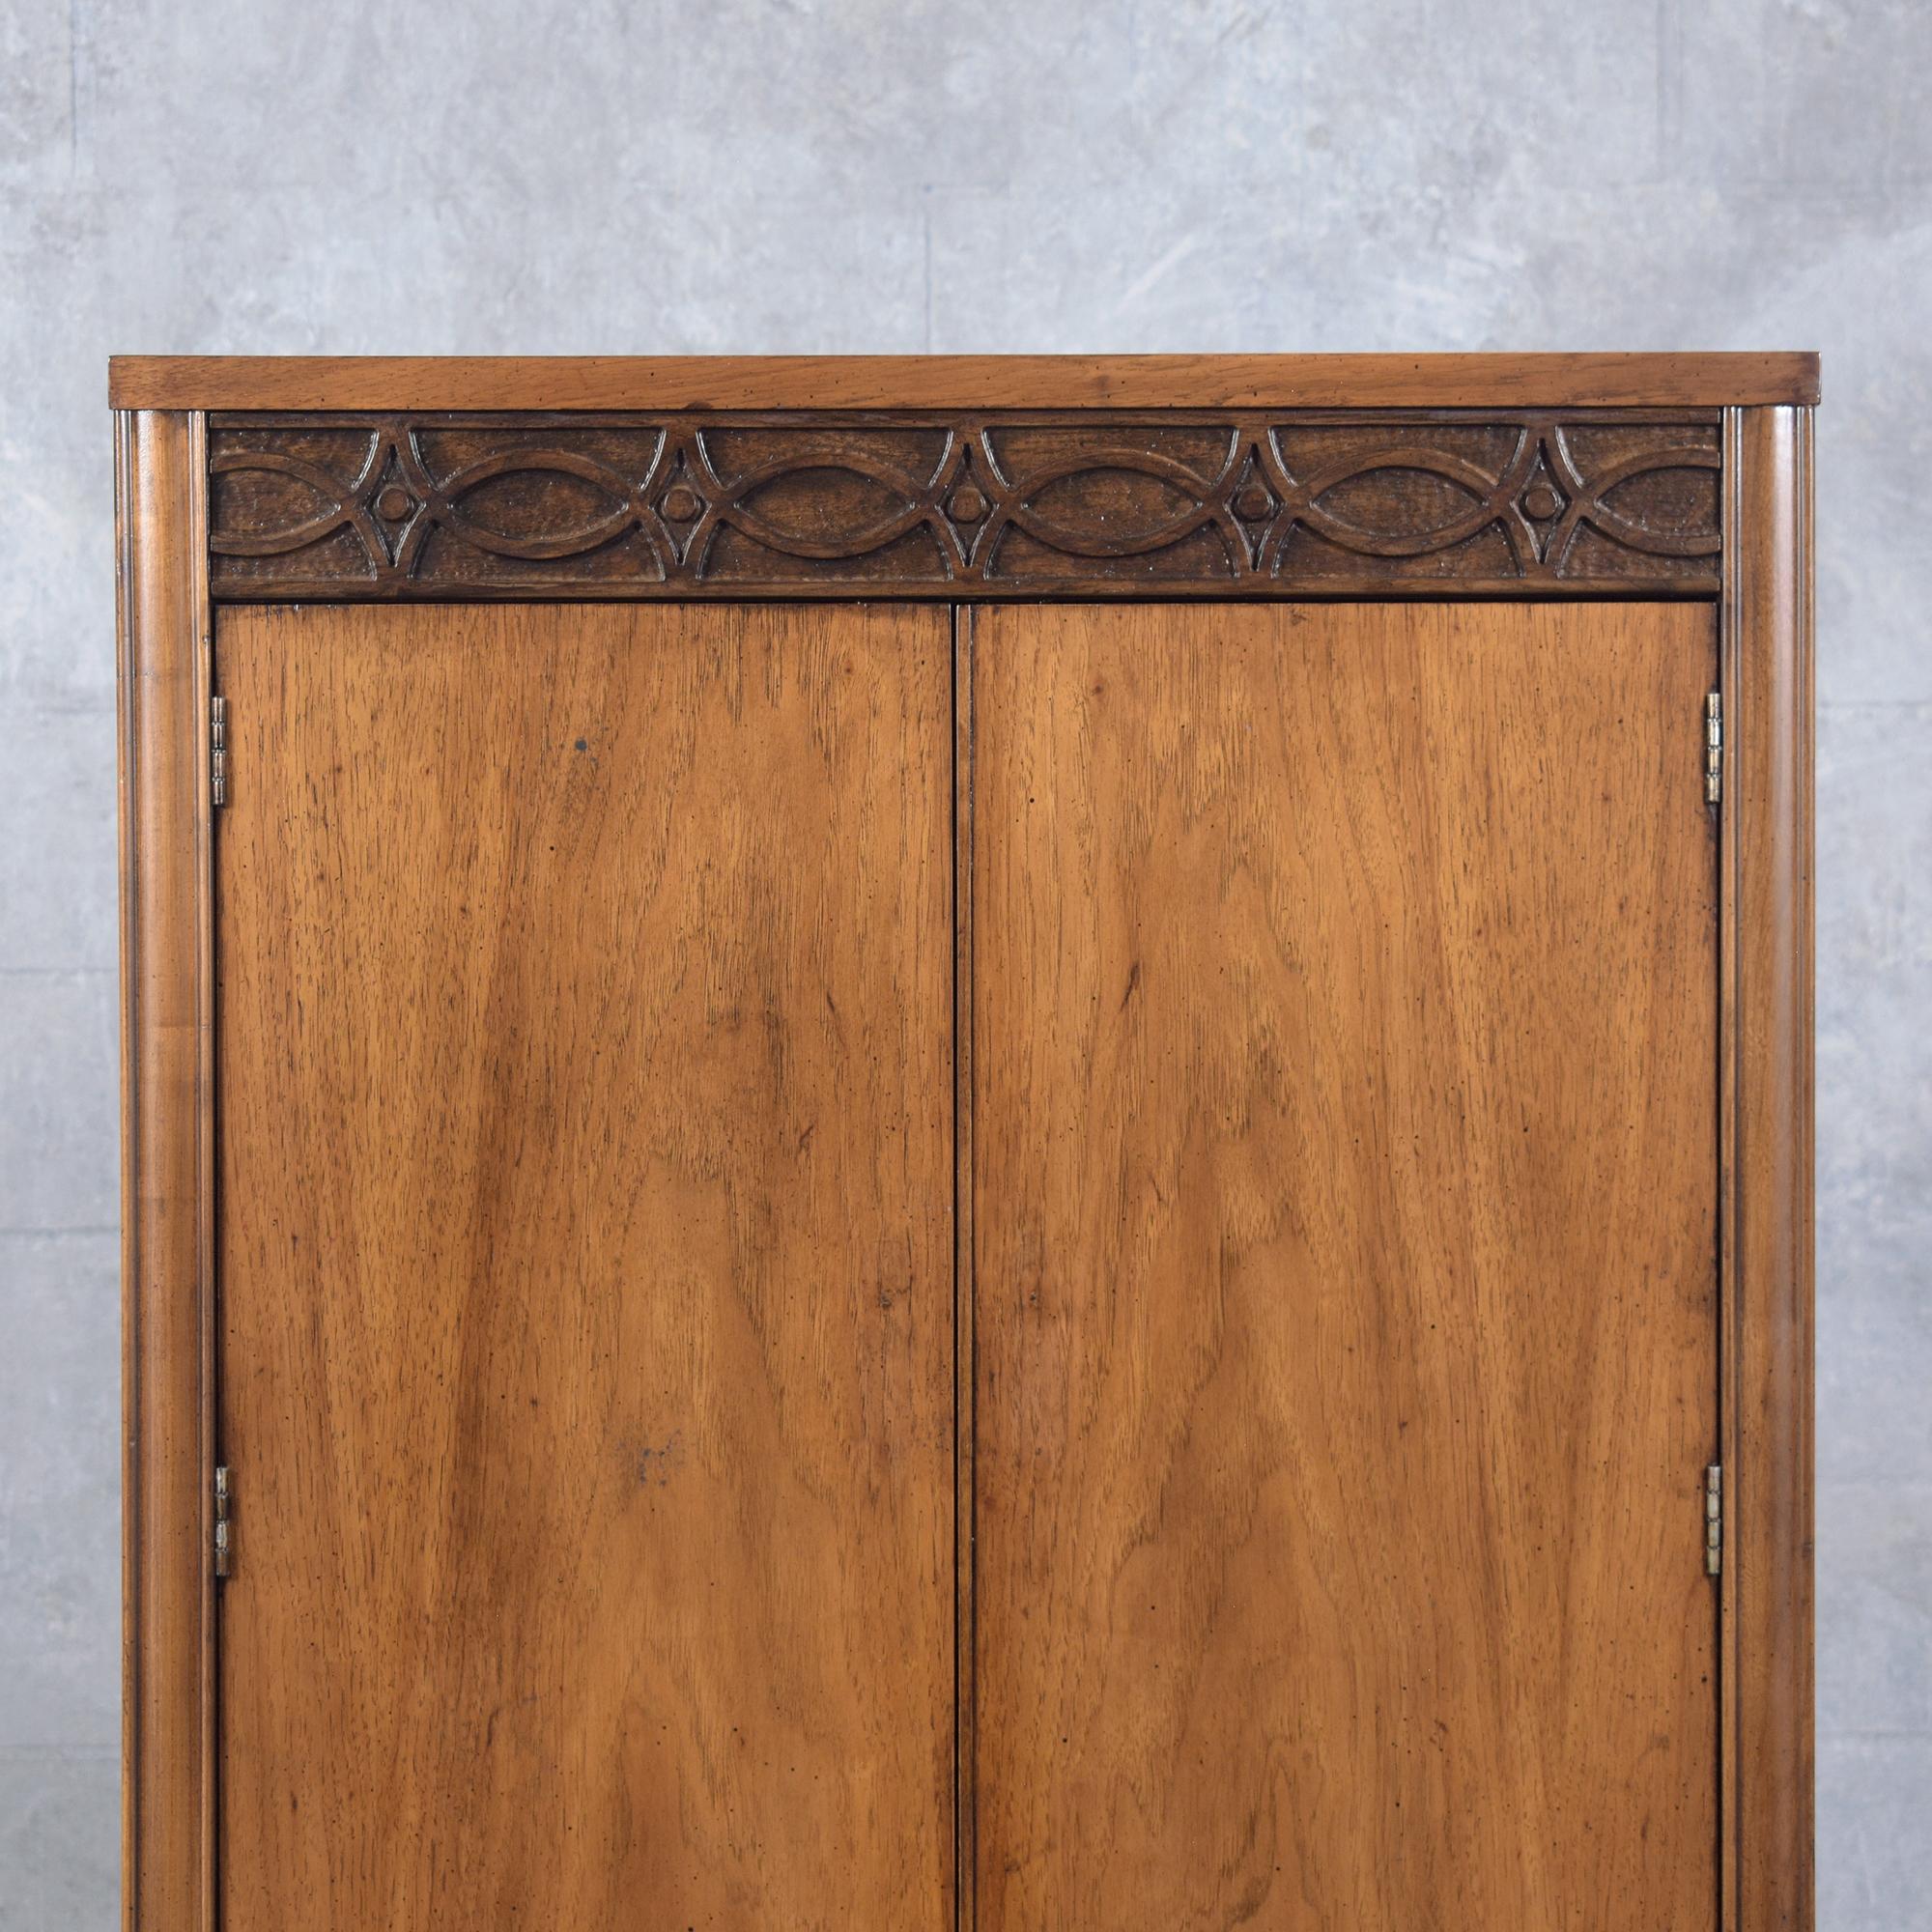 Stunning 1960s Mid-Century Modern Walnut Bachelor Chest with Sculpted Details For Sale 1